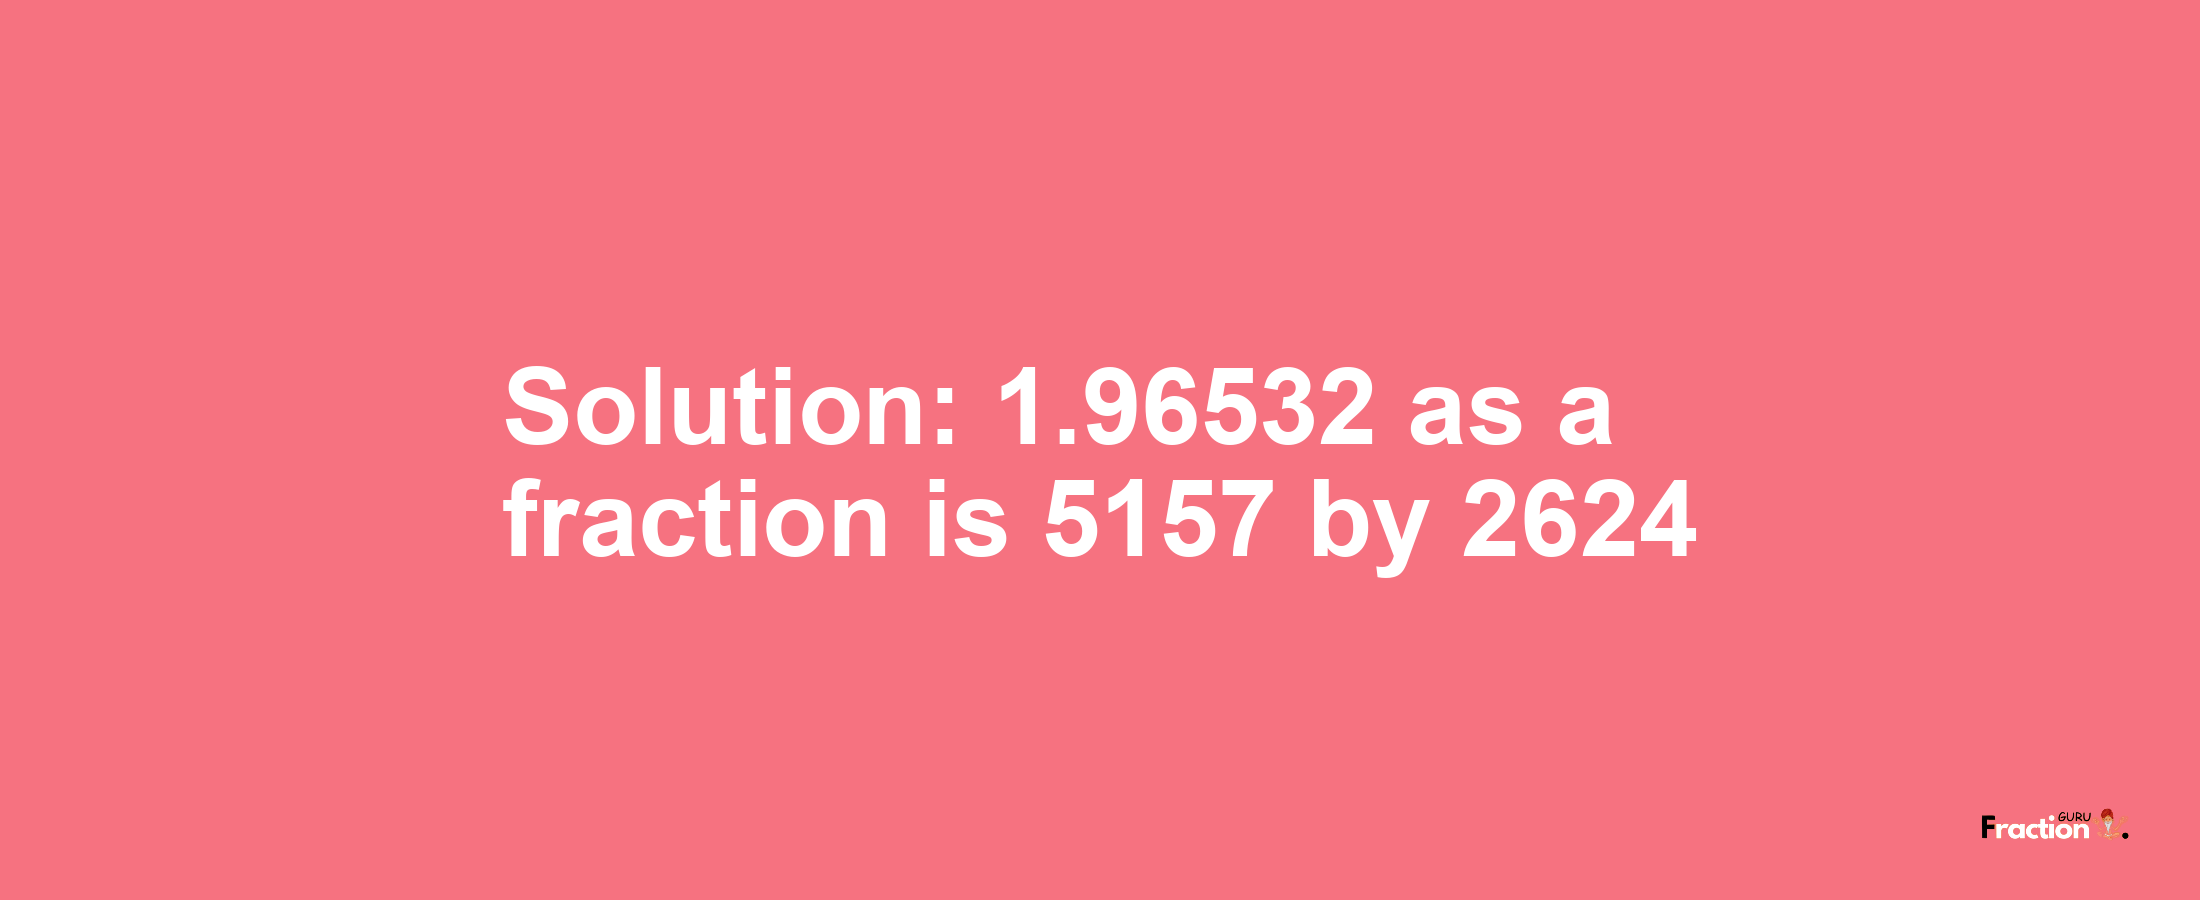 Solution:1.96532 as a fraction is 5157/2624